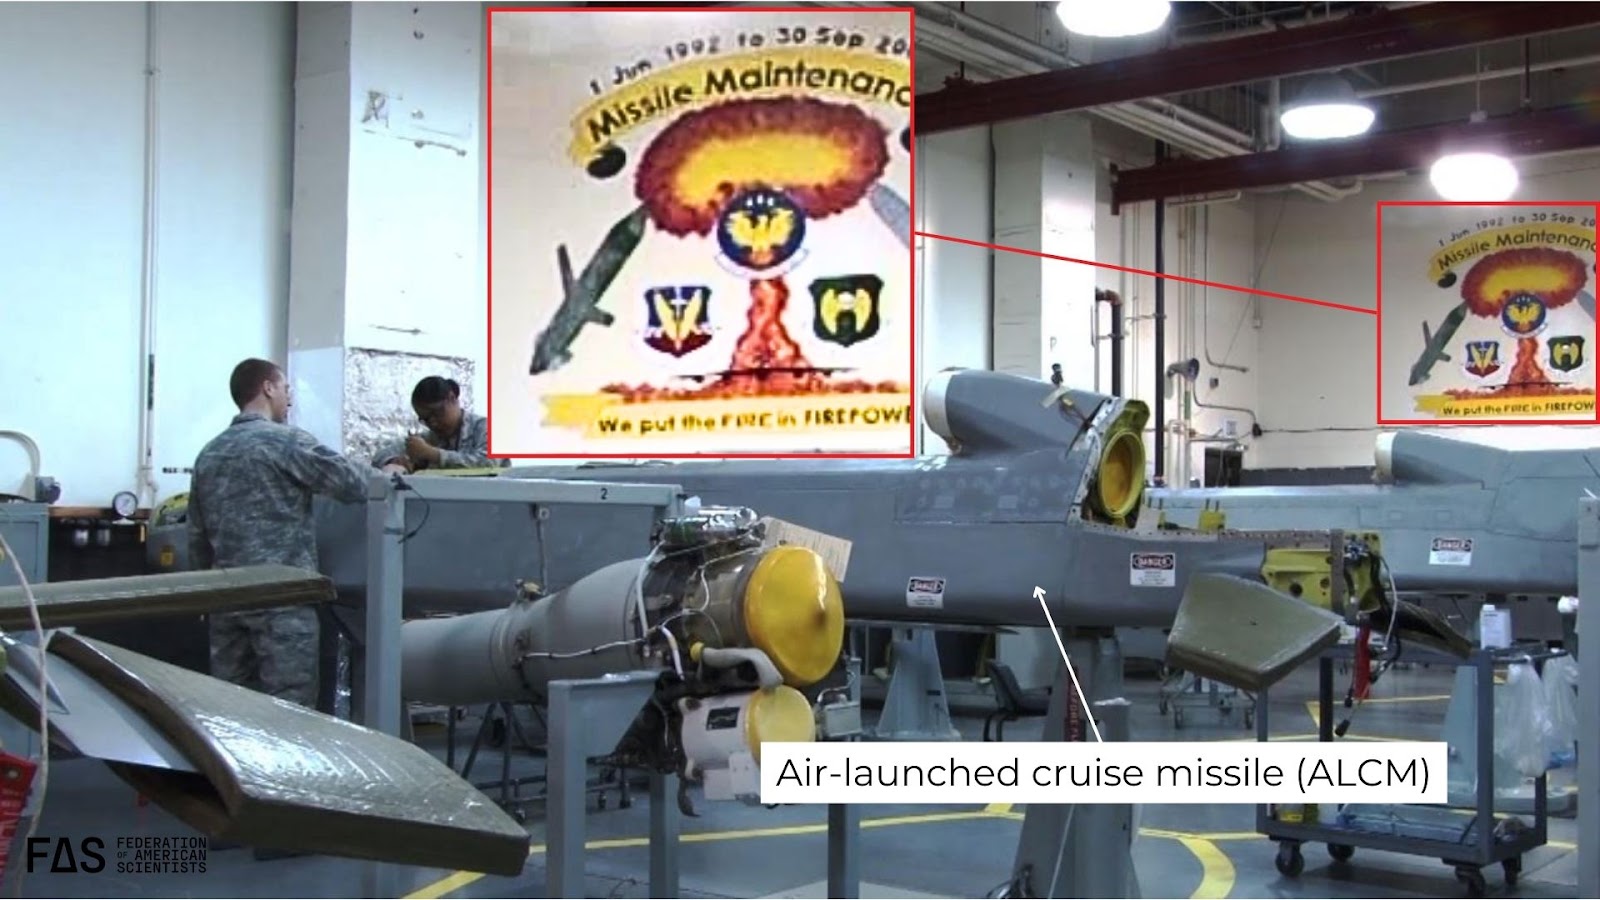 Image from US Air Force of inside ALCM maintenance facility at Barksdale AFB in 2013. The insignia on the wall shows a mushroom cloud and slogan reading “We put the FIRE in FIREPOWER.”